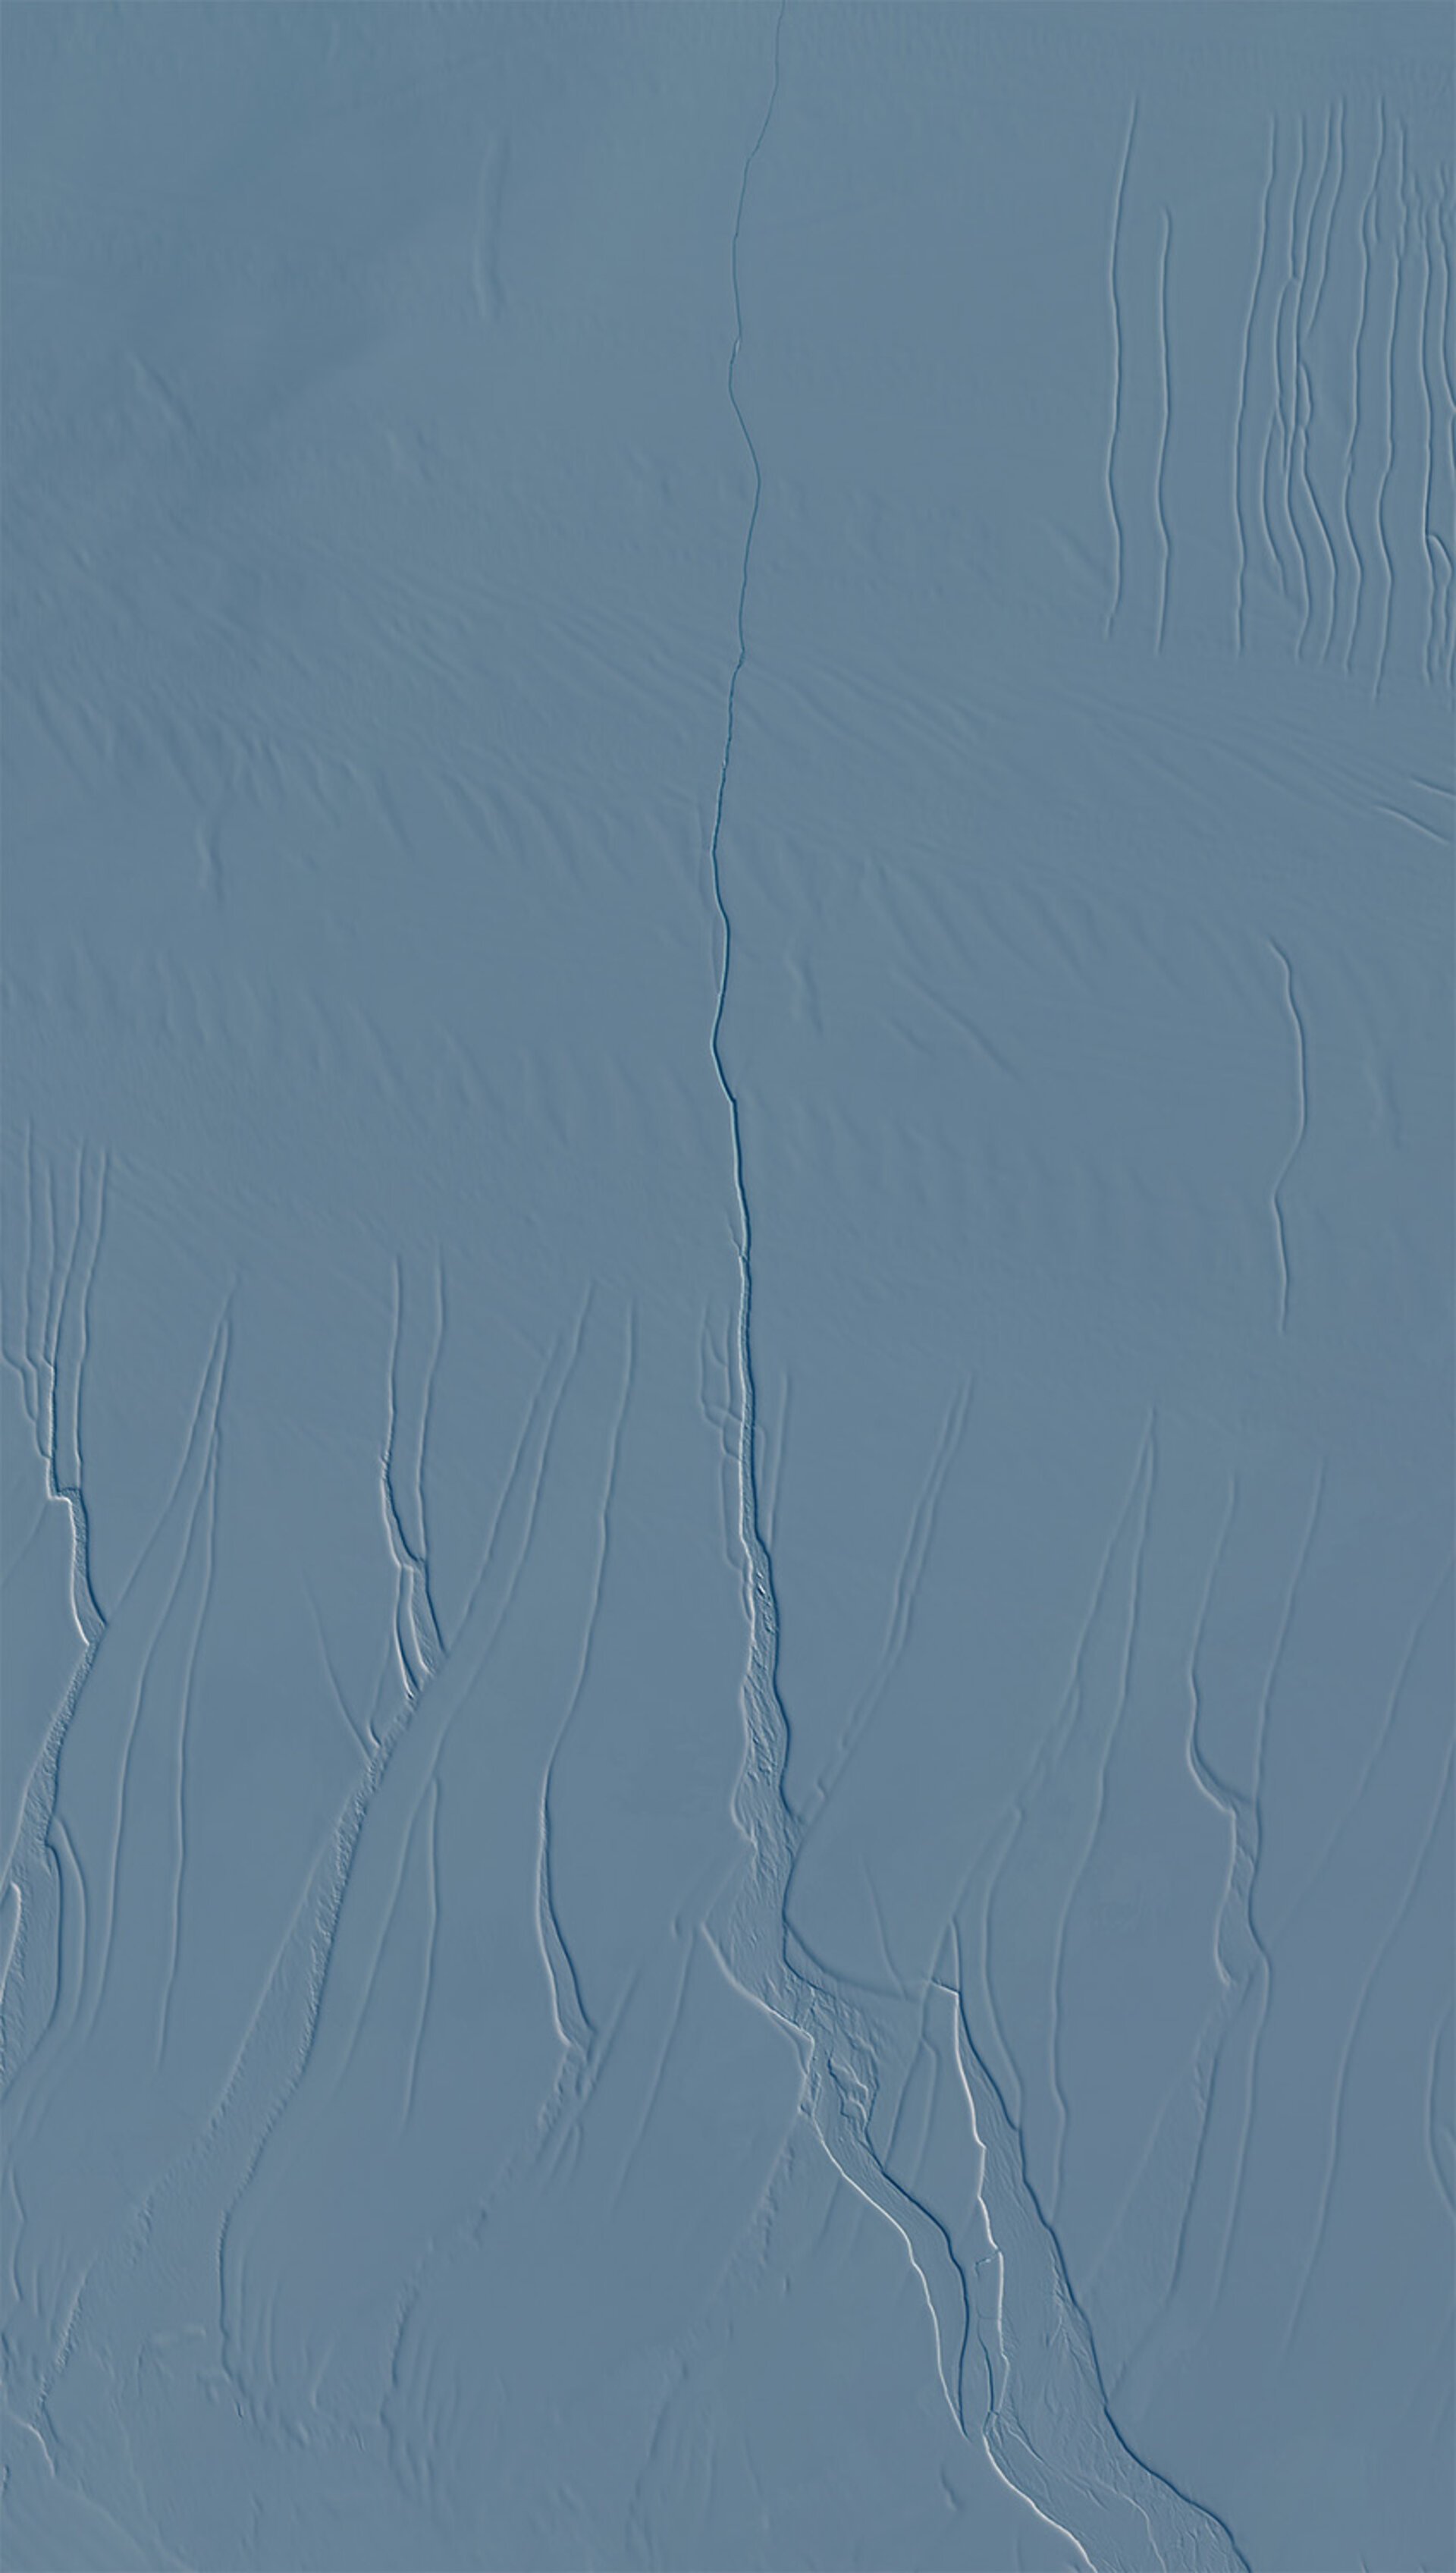 Ice crack seen by Sentinel-2A